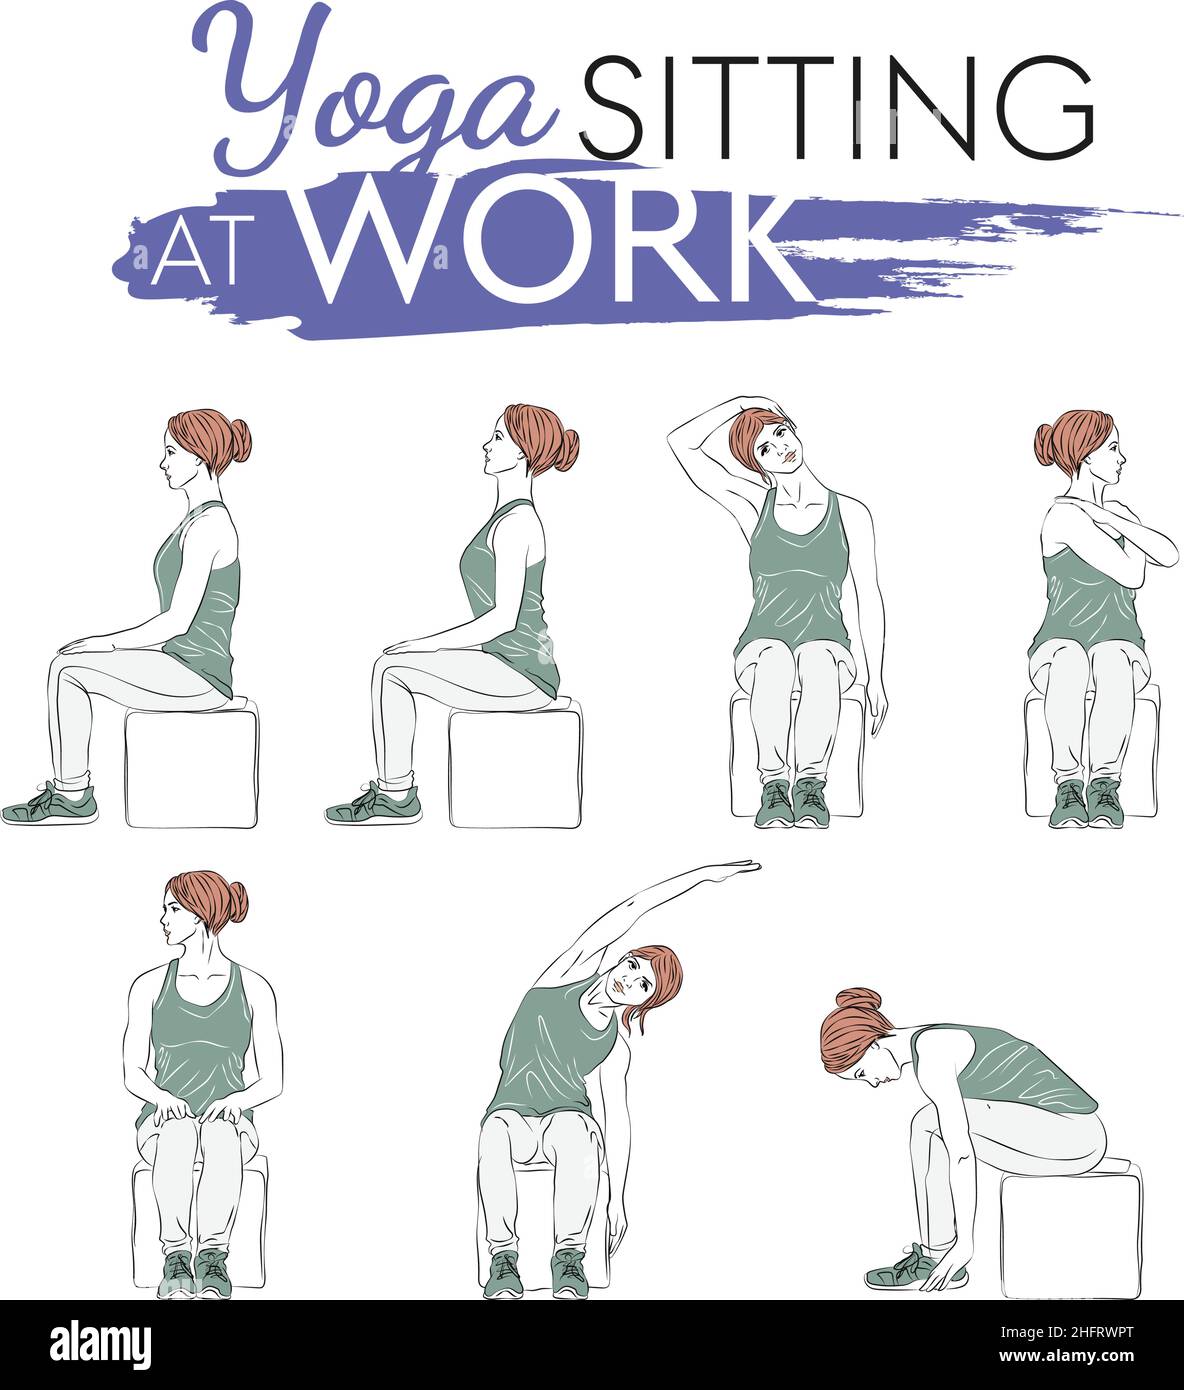 8 Yoga Poses To Undo The Damage Of Desk Sitting | Gym+Coffee IE